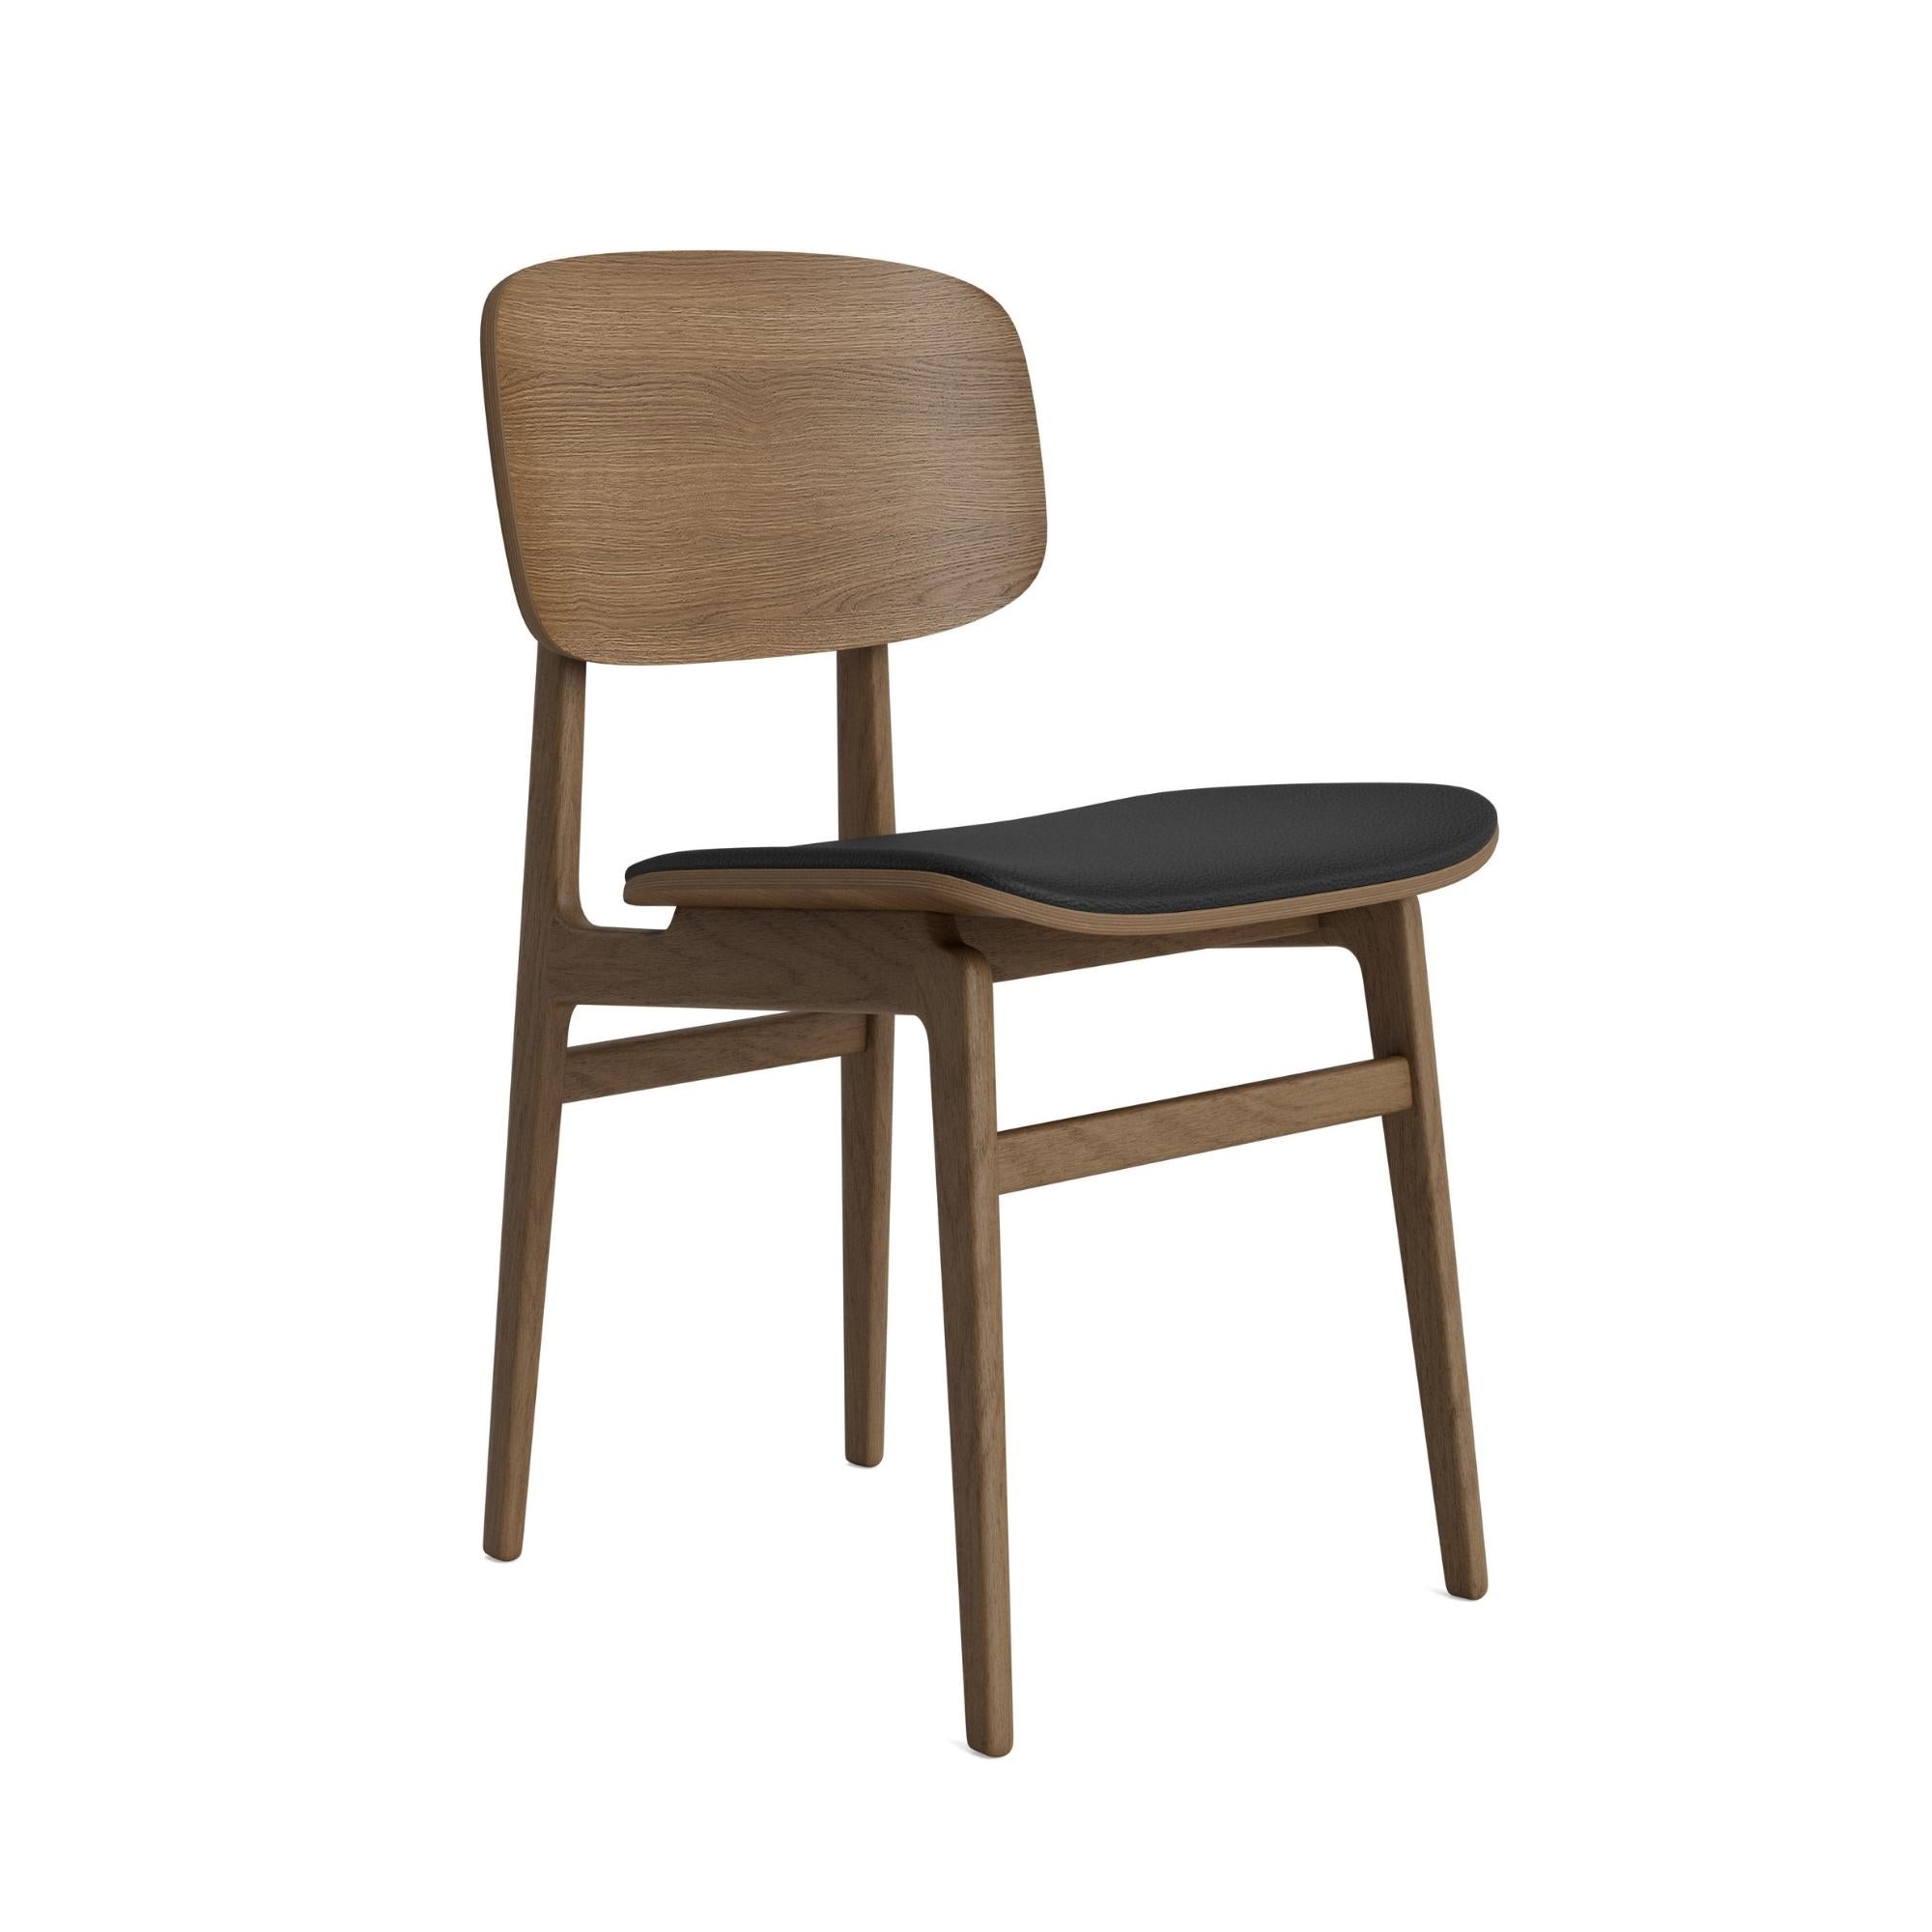 NY11 Chair - Leather